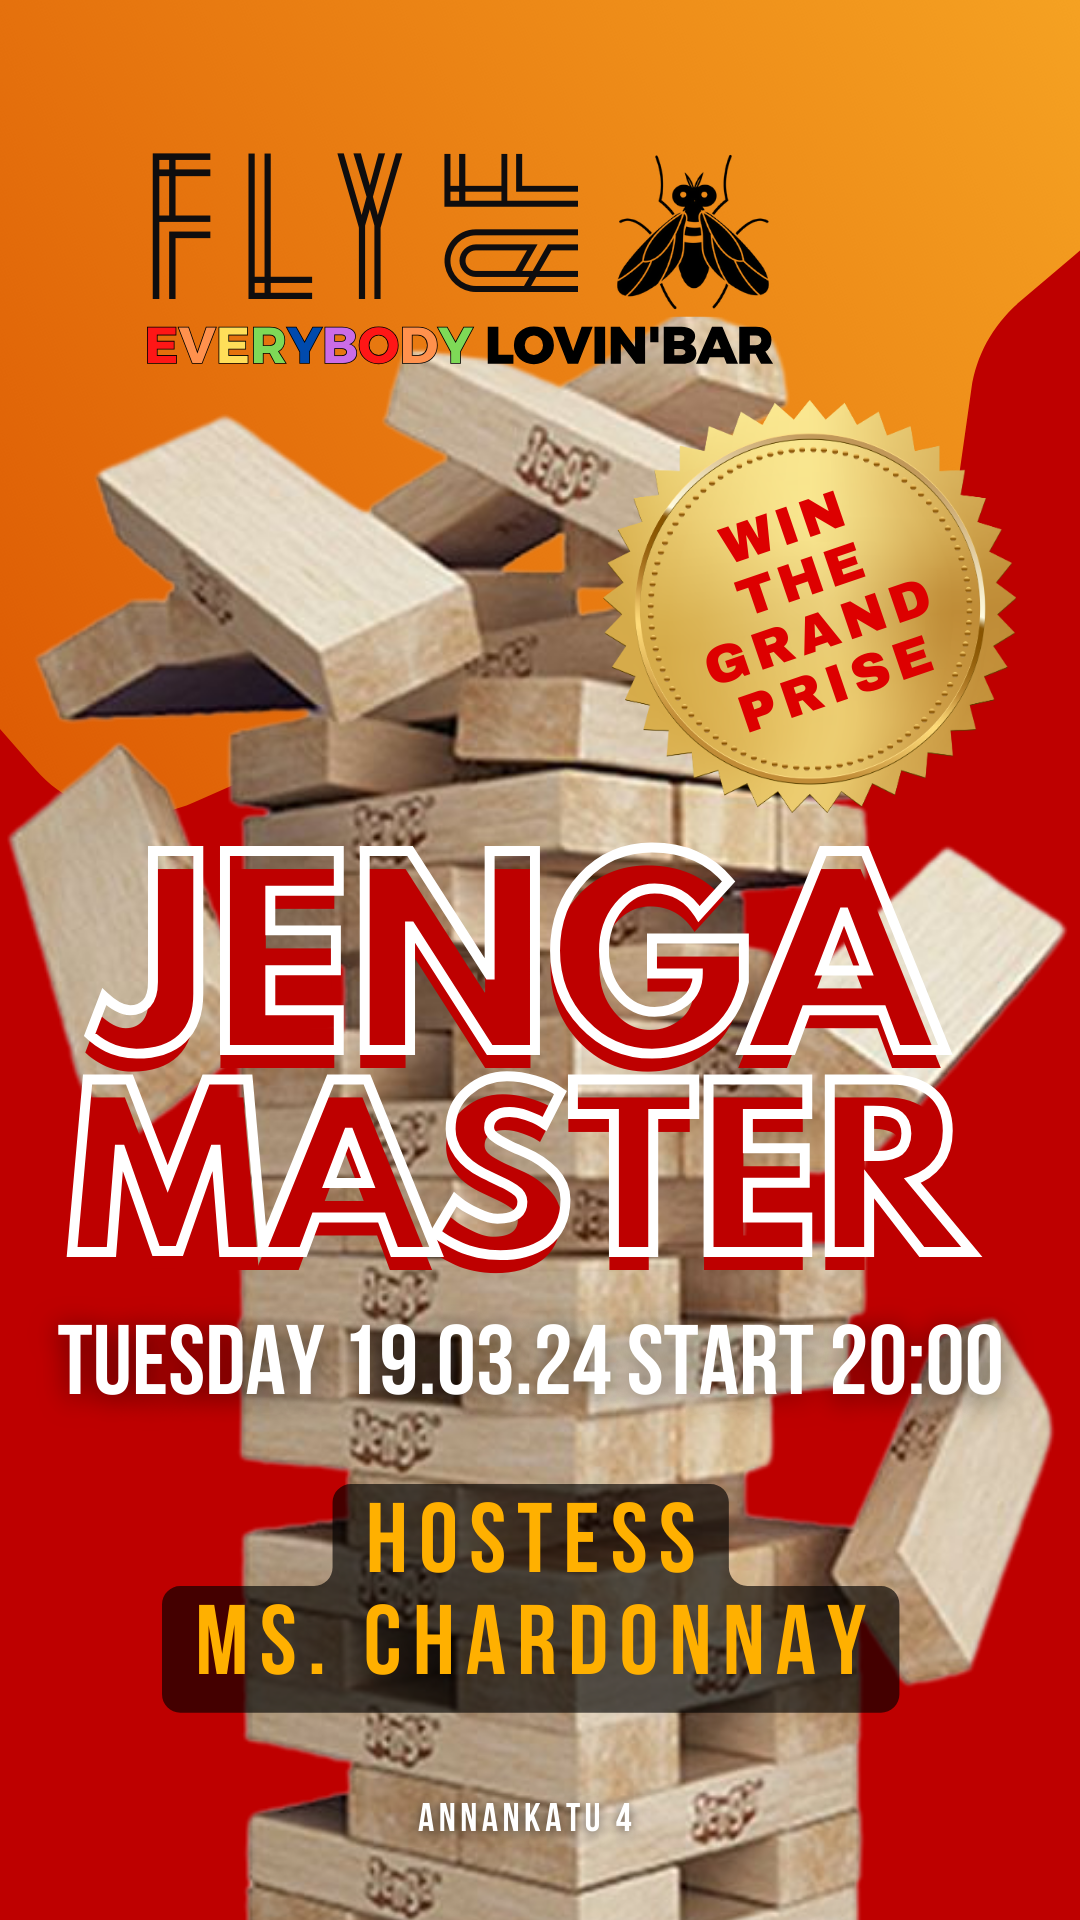 Join us at FlyAF this Tuesday at 20:00 for our ultimate Jenga Master event!